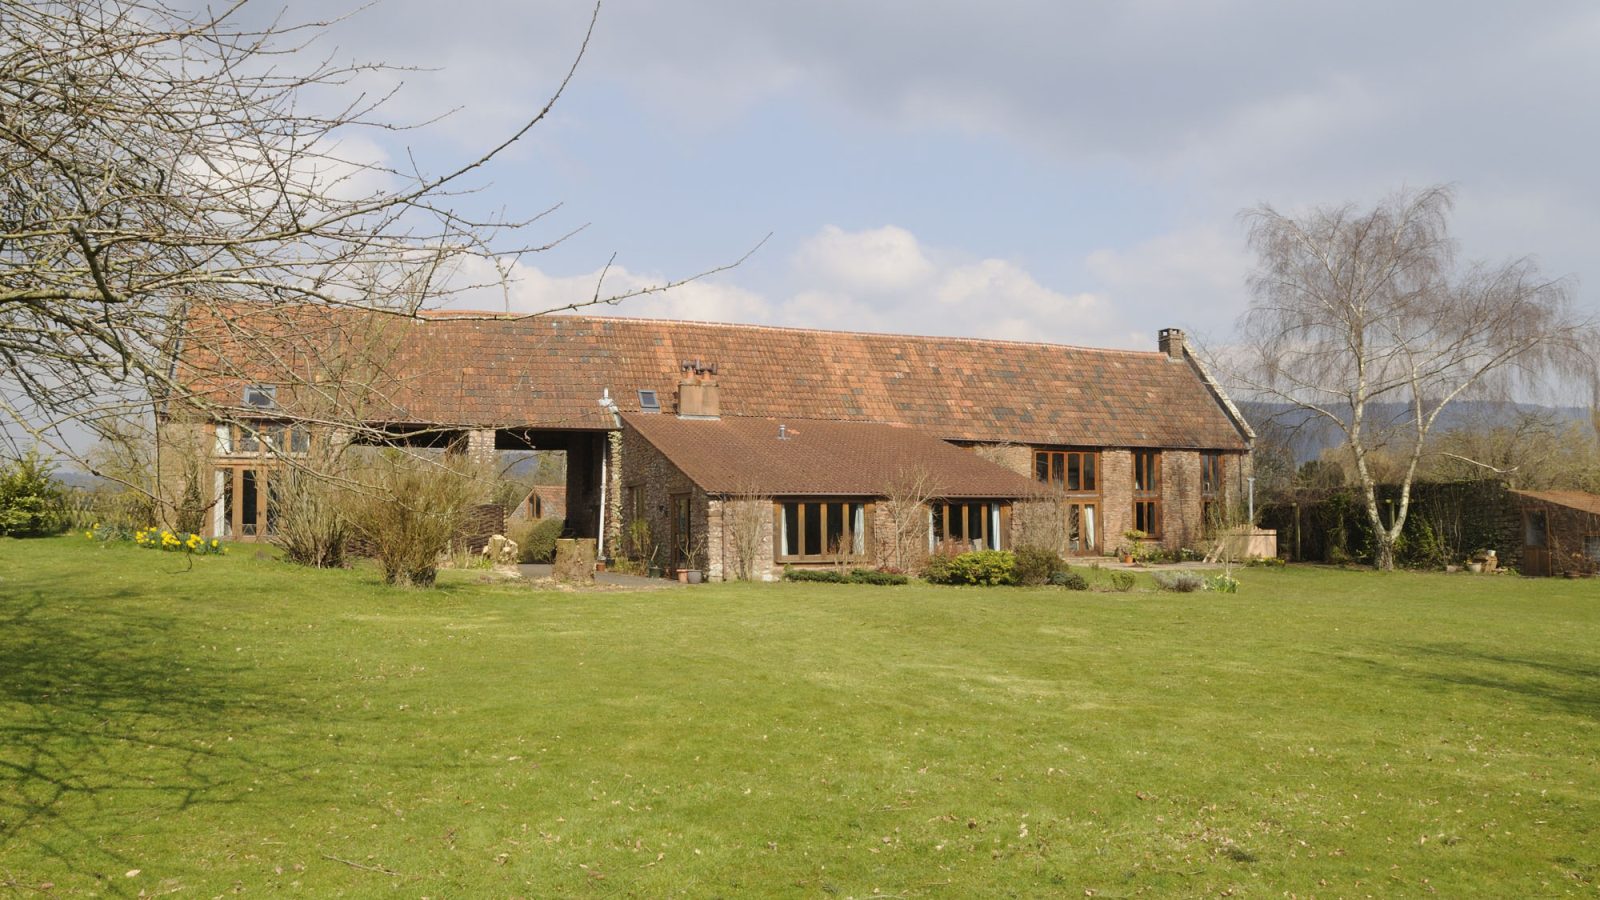 The Old Stone Barns - kate & tom's Large Holiday Homes